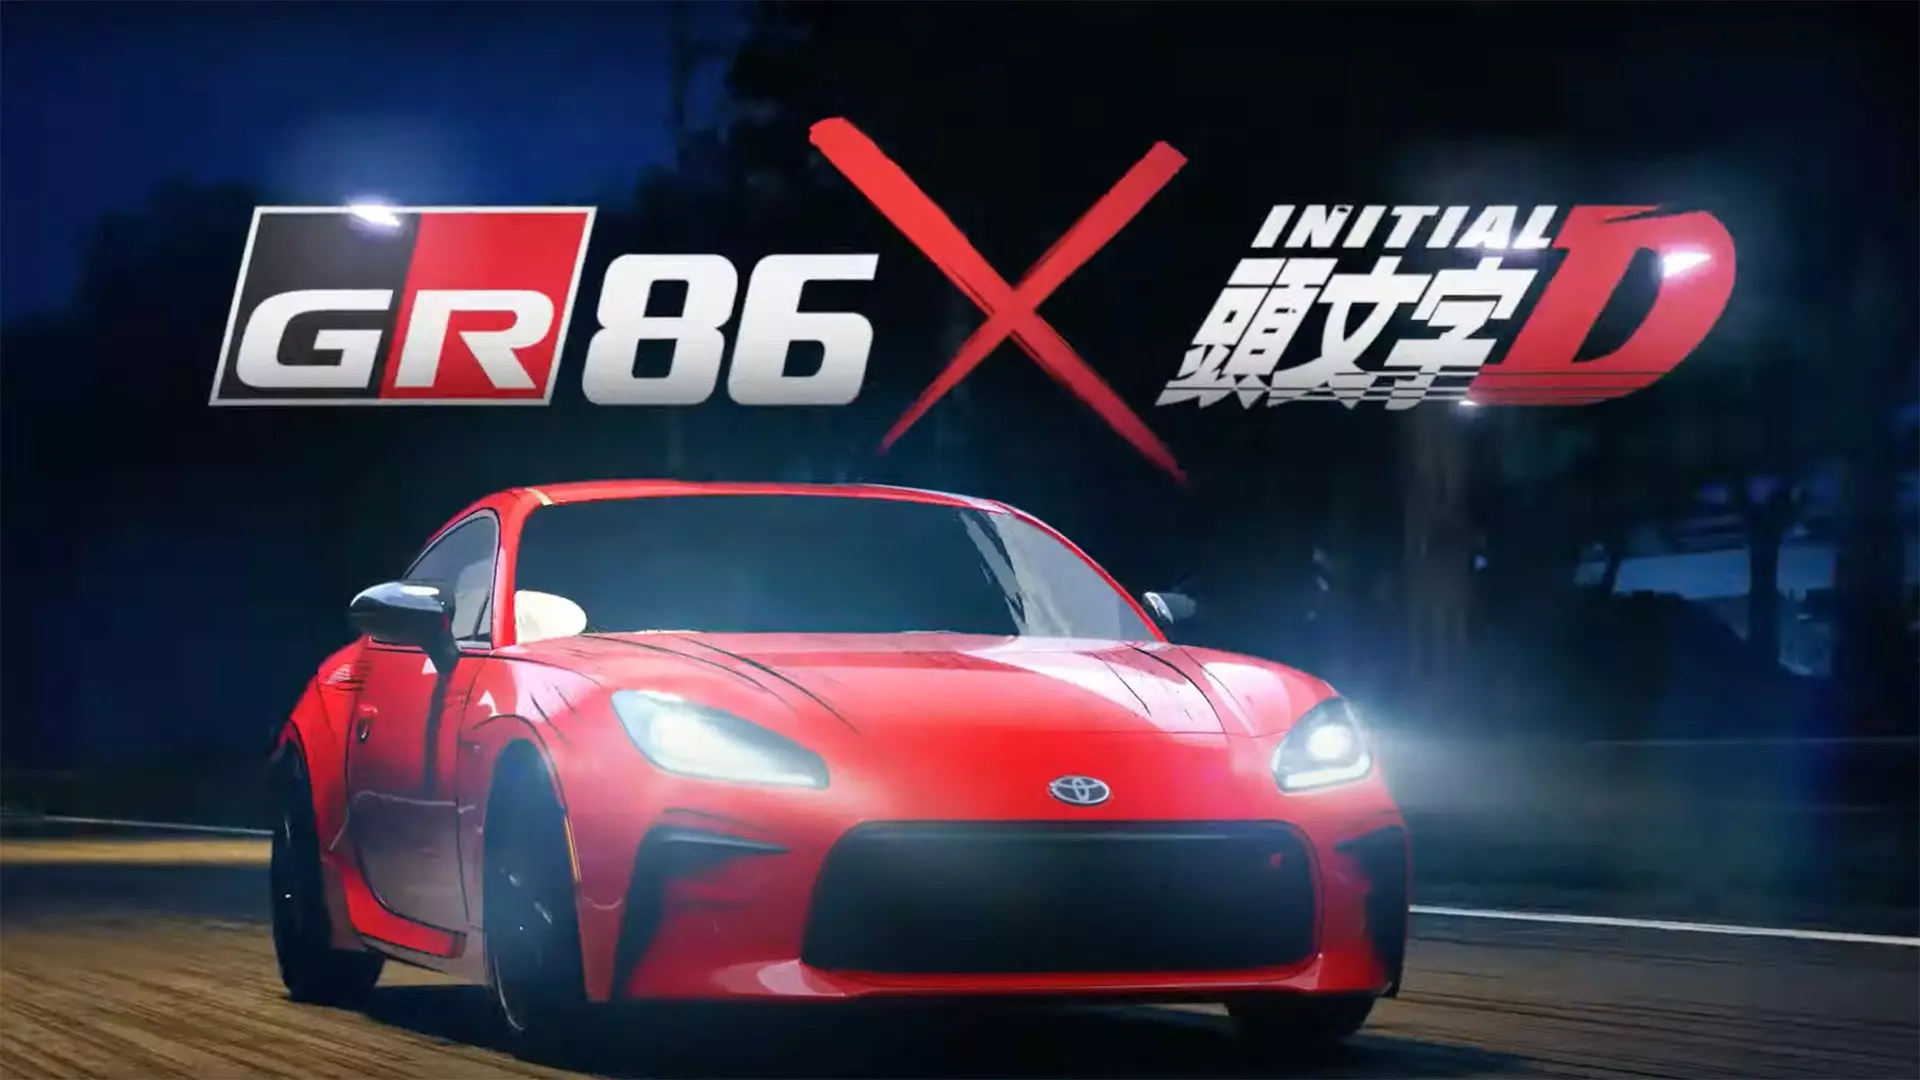 Toyota Got the Initial D Creator To Illustrate a GR86 Commercial, and It’s Legit | Autance